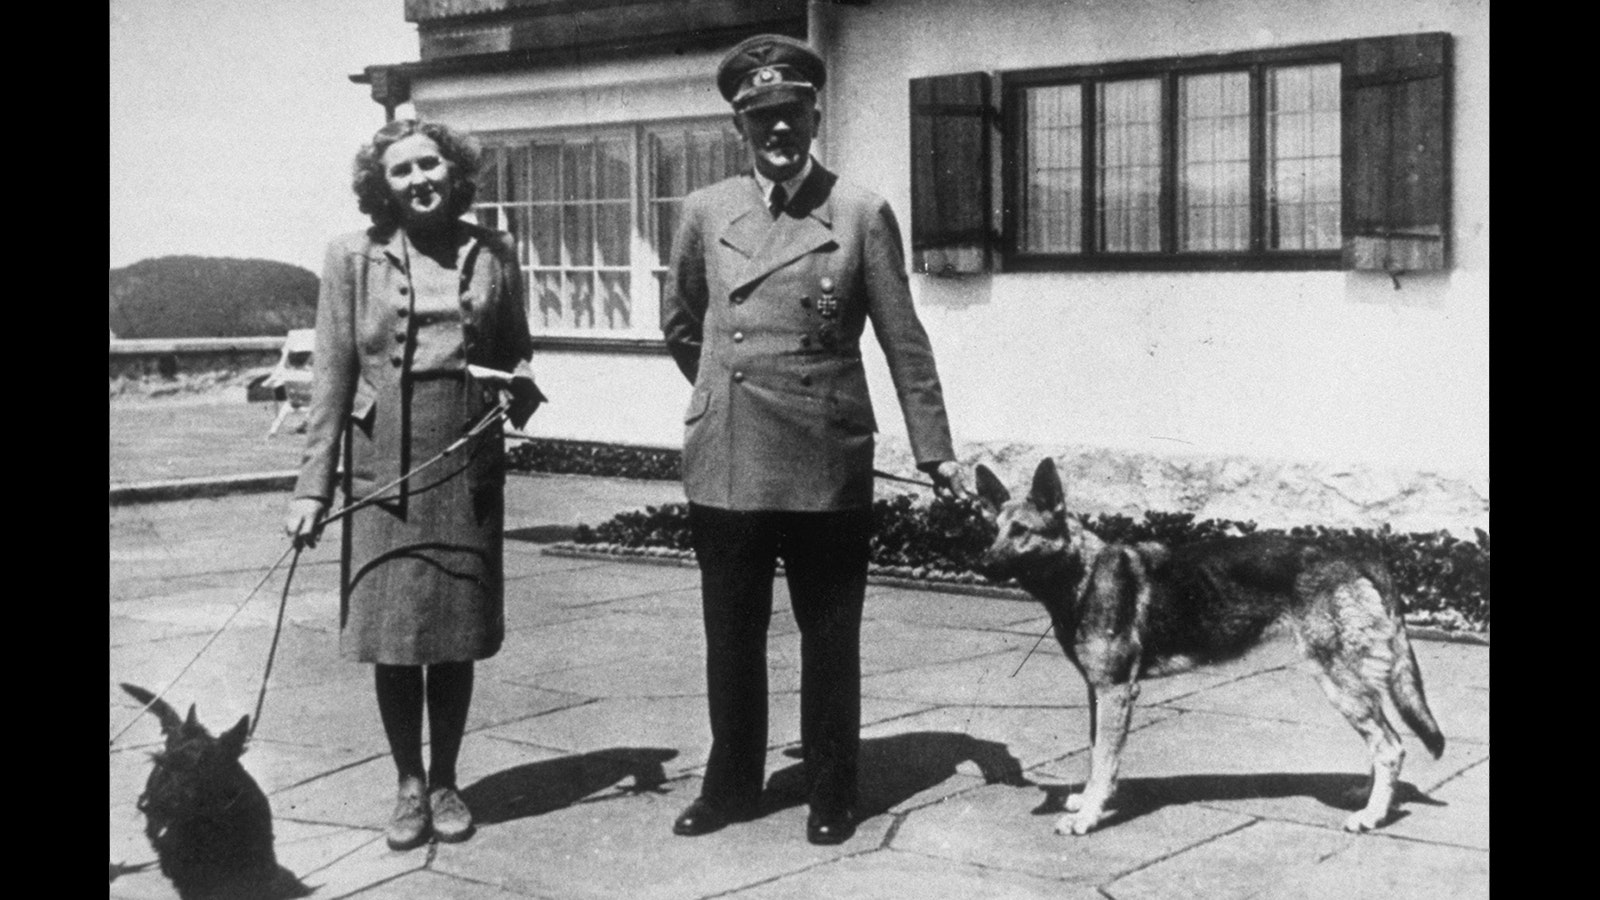 Among the photos believed to be in the photo albums Pvt. Alton More took from Adolph Hitler's Eagle's Next retreat are images of Hitler and his mistress, Eva Braun.